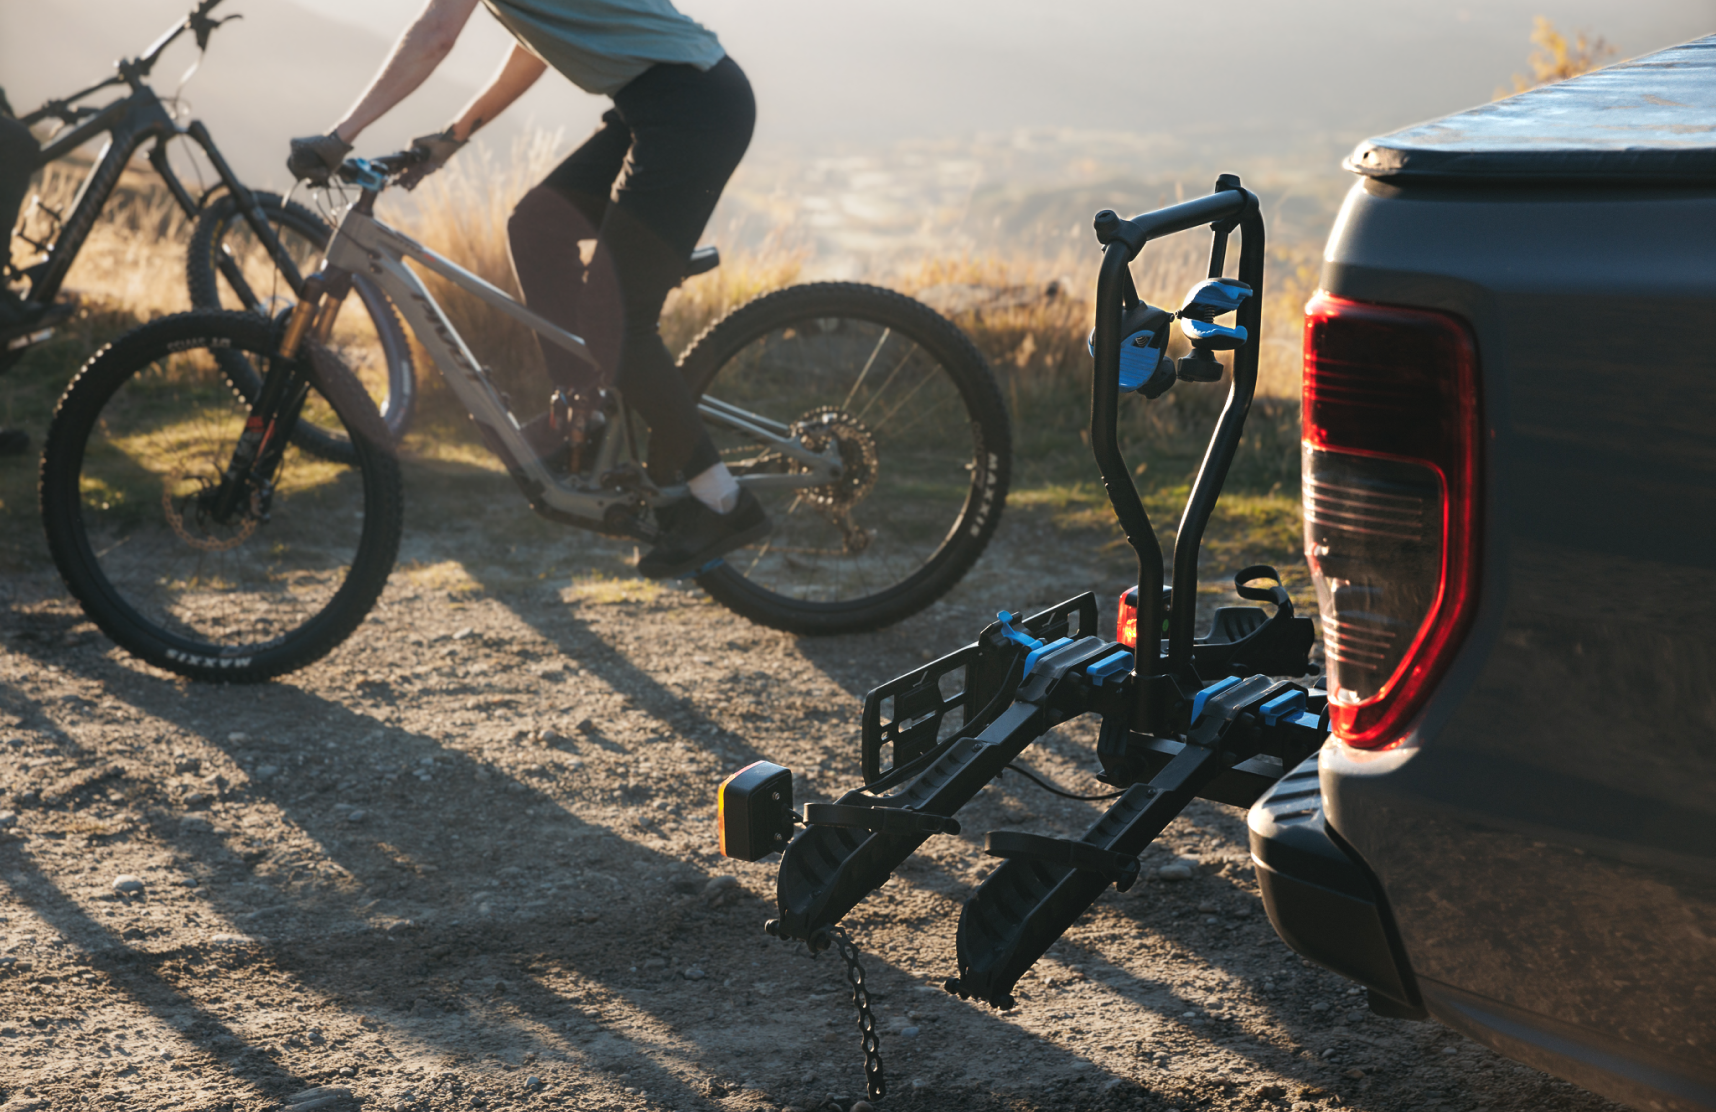 Get to know our favourite ebike rack, the E-Rack 2